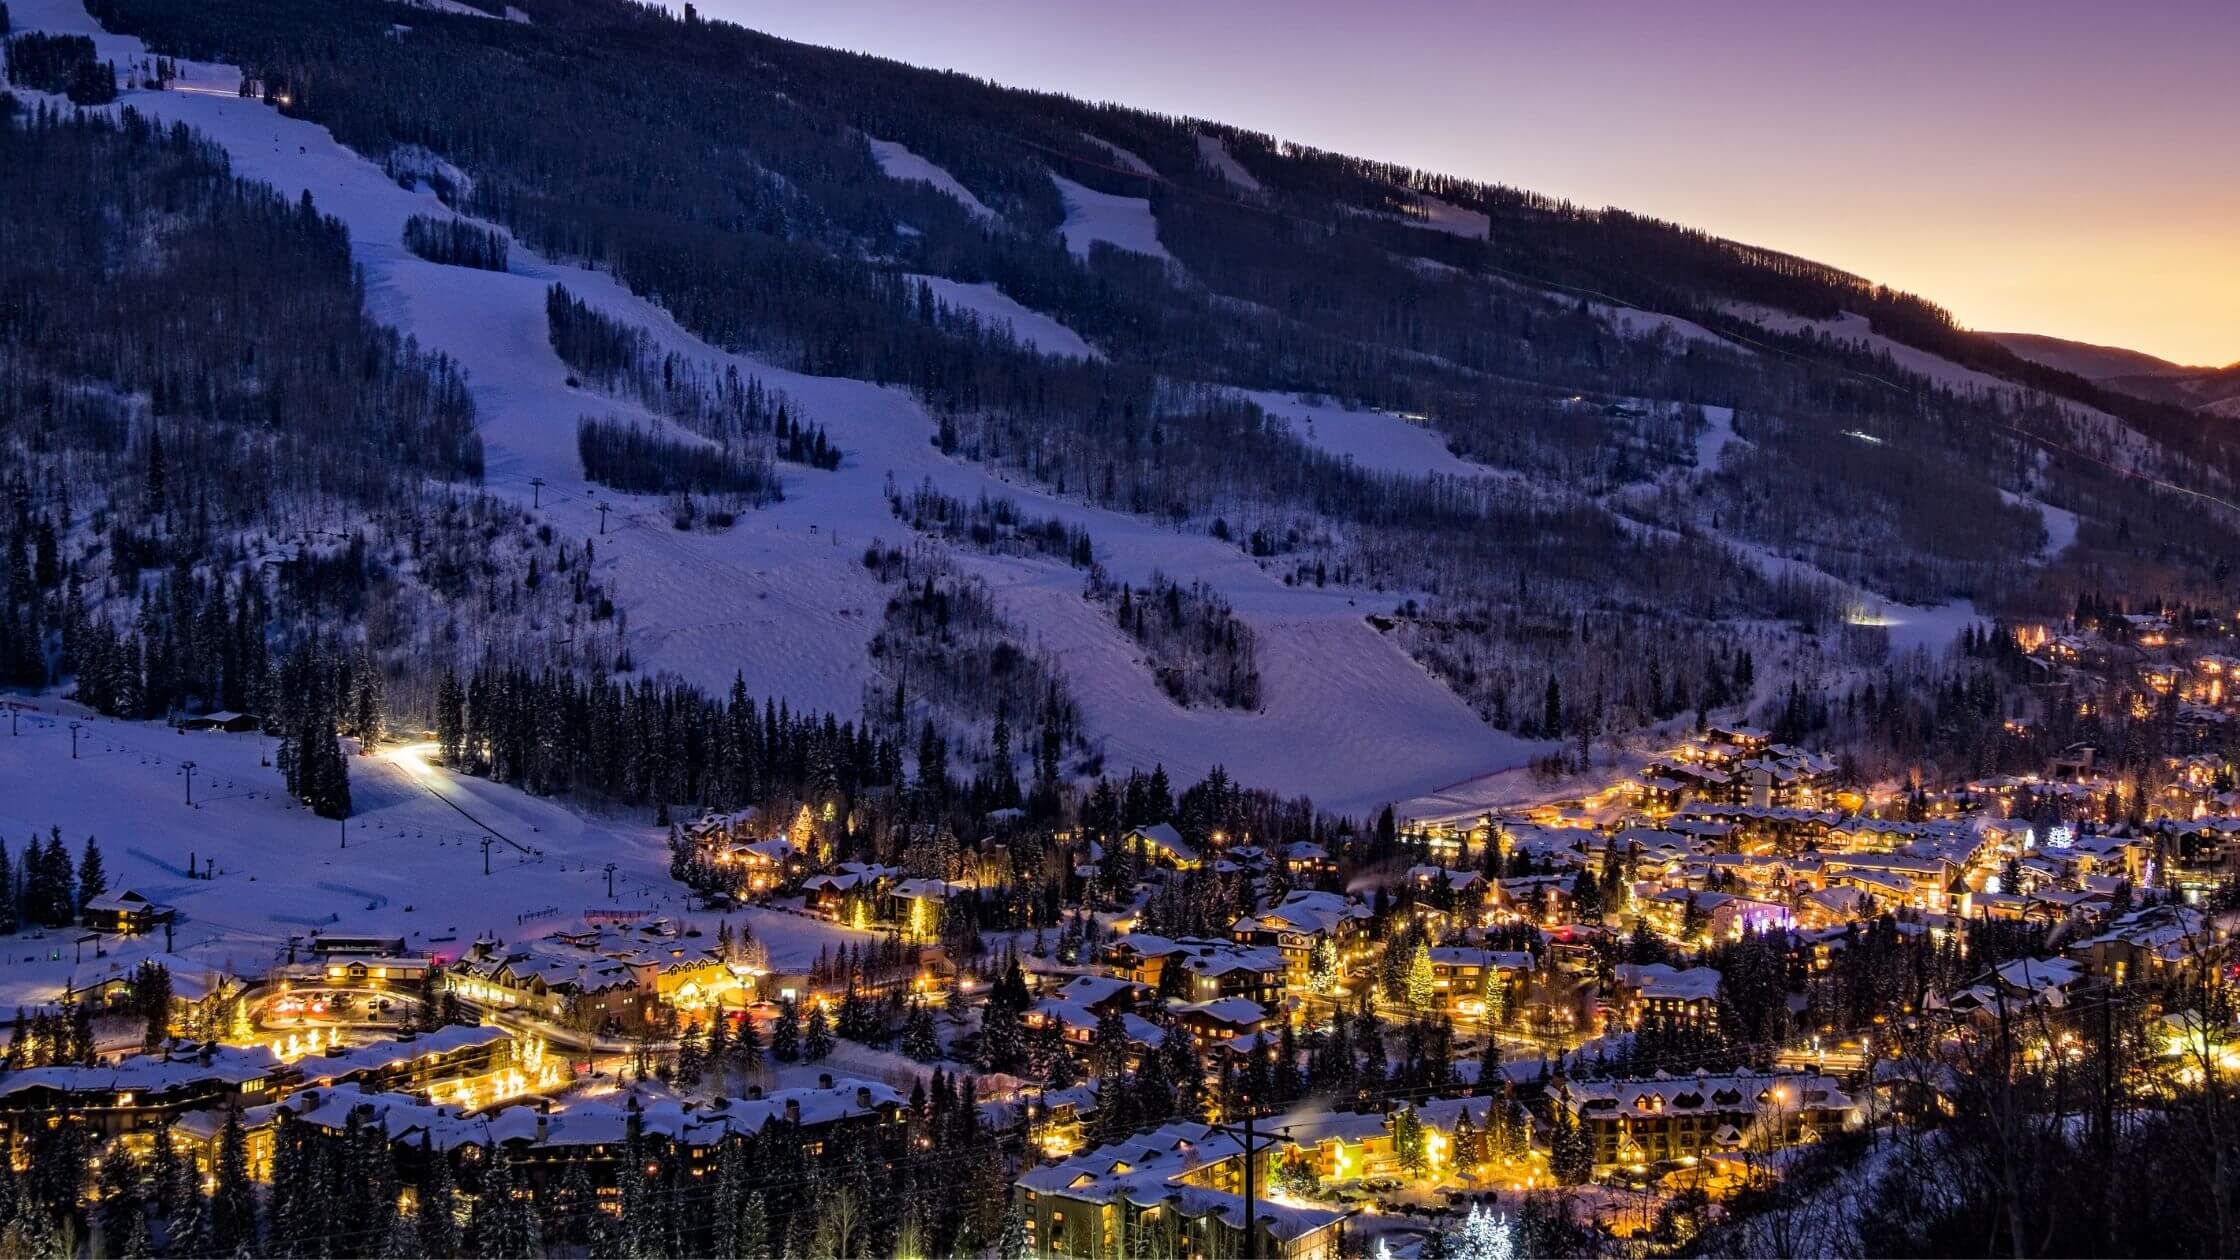 Vail, Colorado: What to do in the Winter